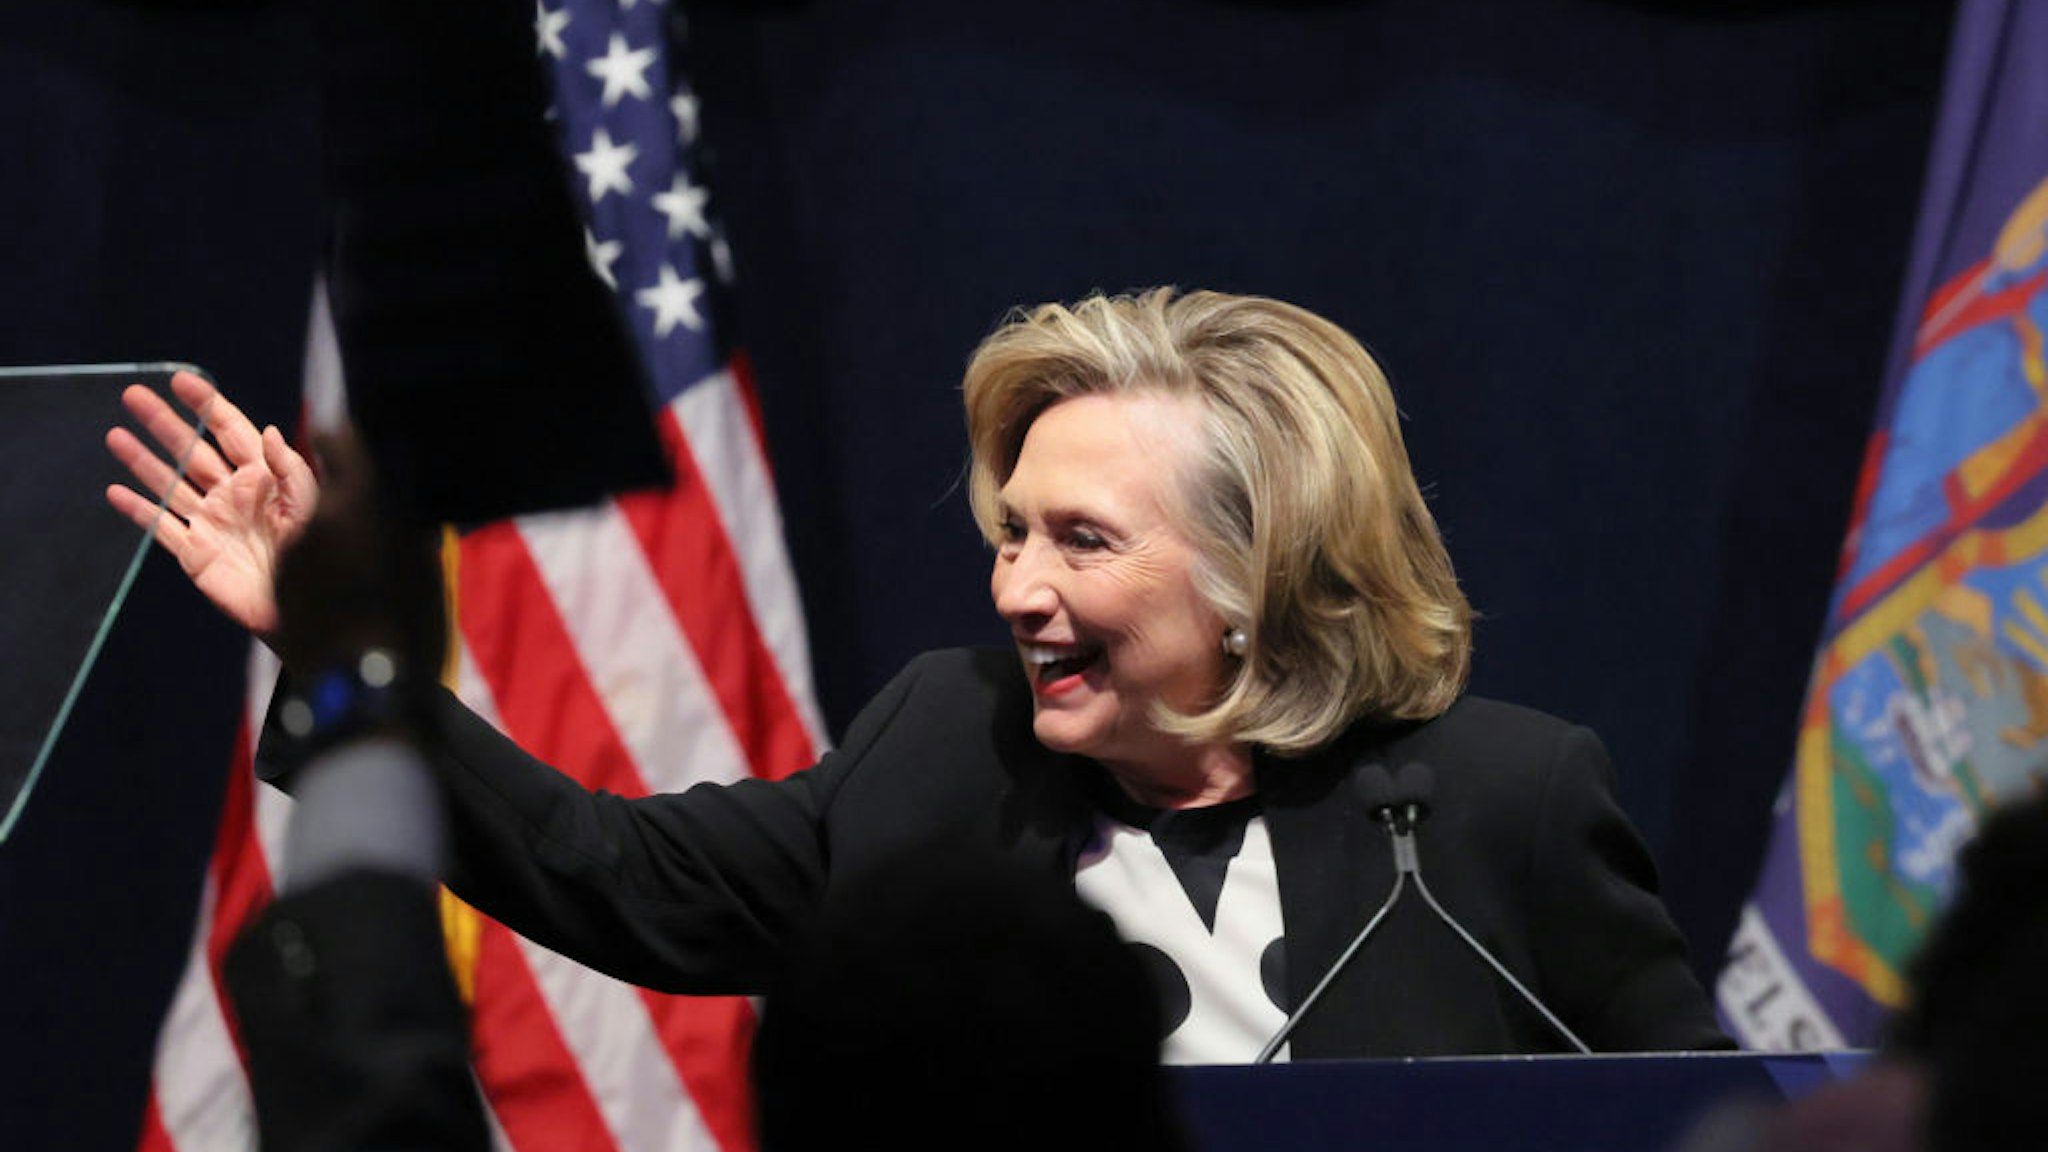 NEW YORK, NEW YORK - FEBRUARY 17:Former Secretary of State Hillary Clinton waves as she prepares to speak during the 2022 New York State Democratic Convention at the Sheraton New York Times Square Hotel on February 17, 2022 in New York City. Former Secretary of State Hillary Clinton gave the keynote address during the second day of the NYS Democratic Convention where the party organized the party's platform and nominated candidates for statewide offices that will be on the ballot this year including the nomination of Gov. Kathy Hochul and her Lt. Gov. Brian Benjamin. (Photo by Michael M. Santiago/Getty Images)